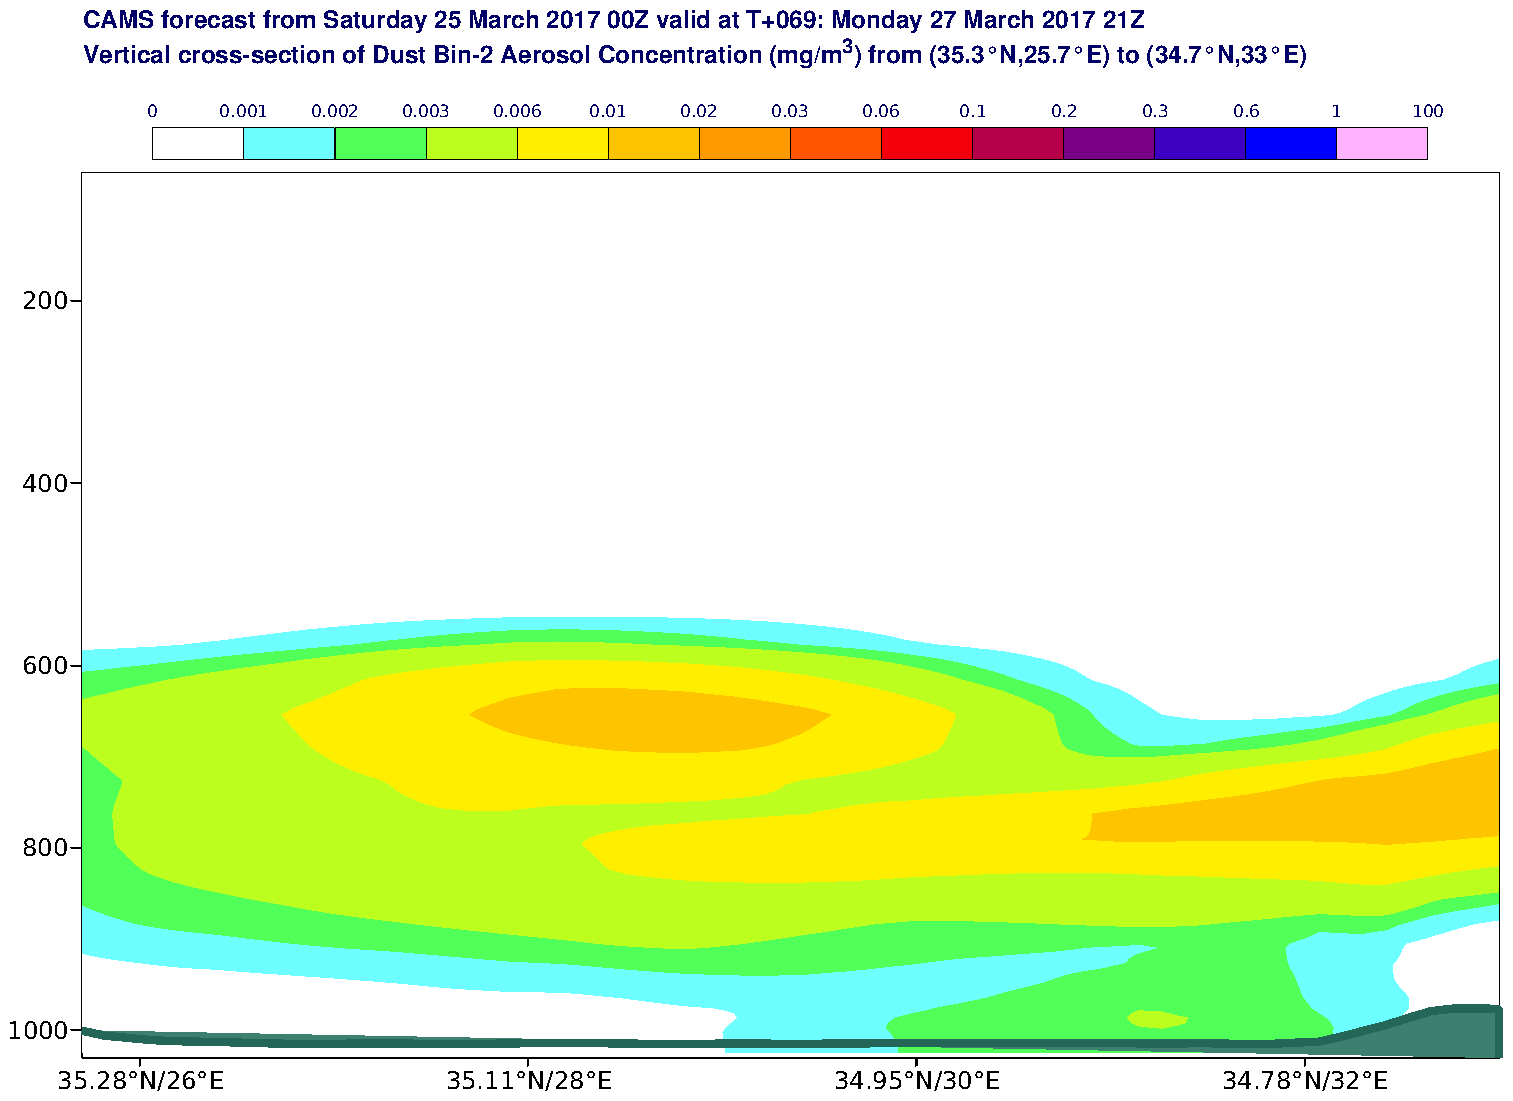 Vertical cross-section of Dust Bin-2 Aerosol Concentration (mg/m3) valid at T69 - 2017-03-27 21:00